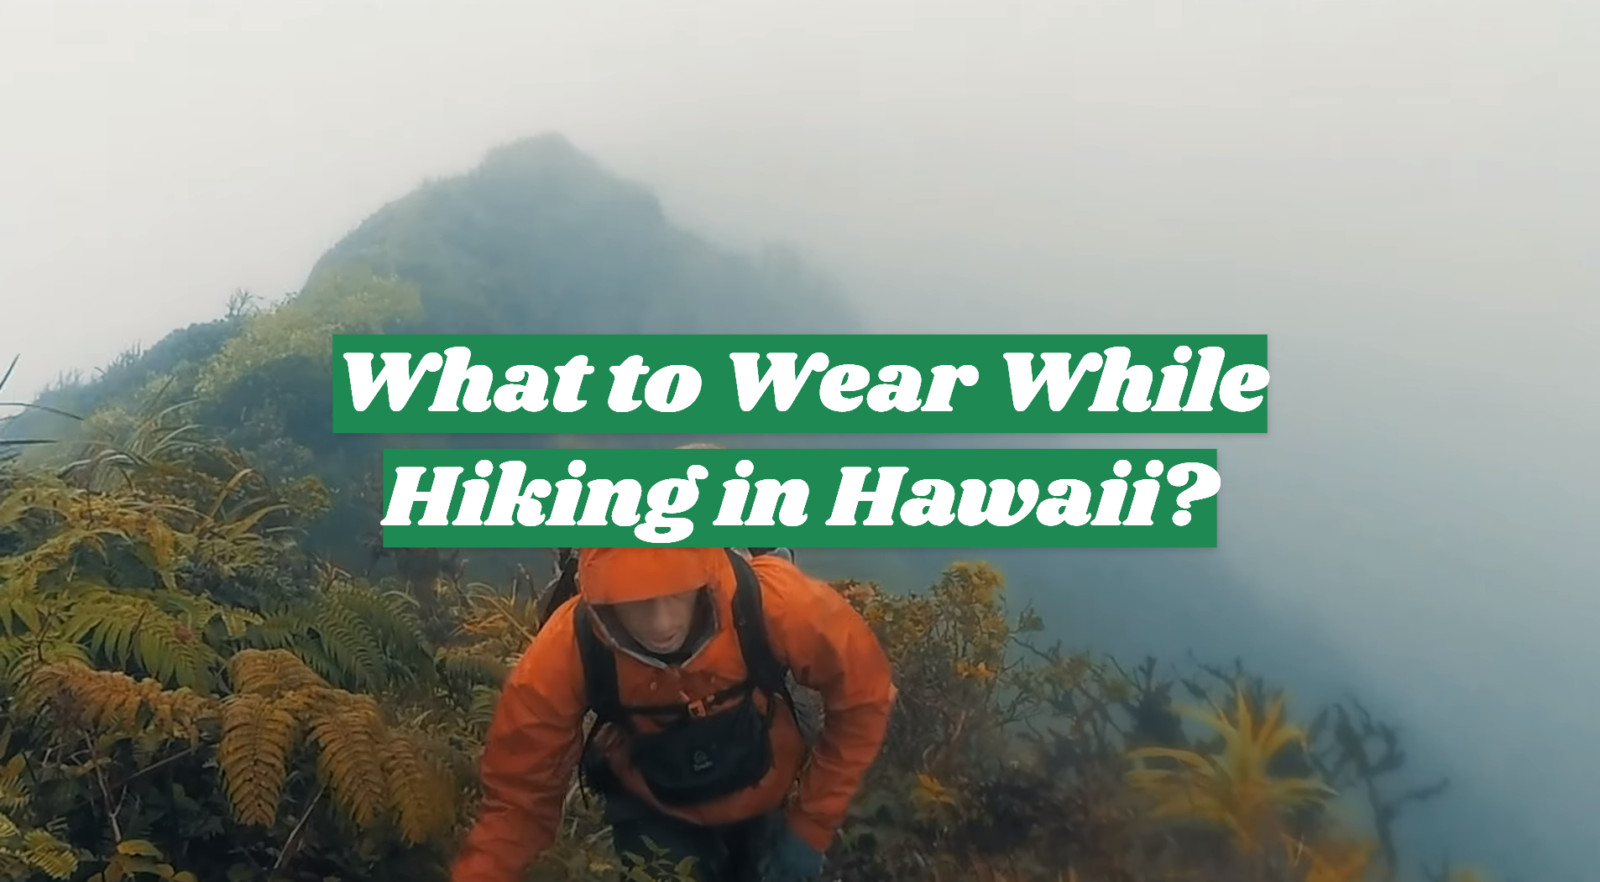 What to Wear While Hiking in Hawaii?